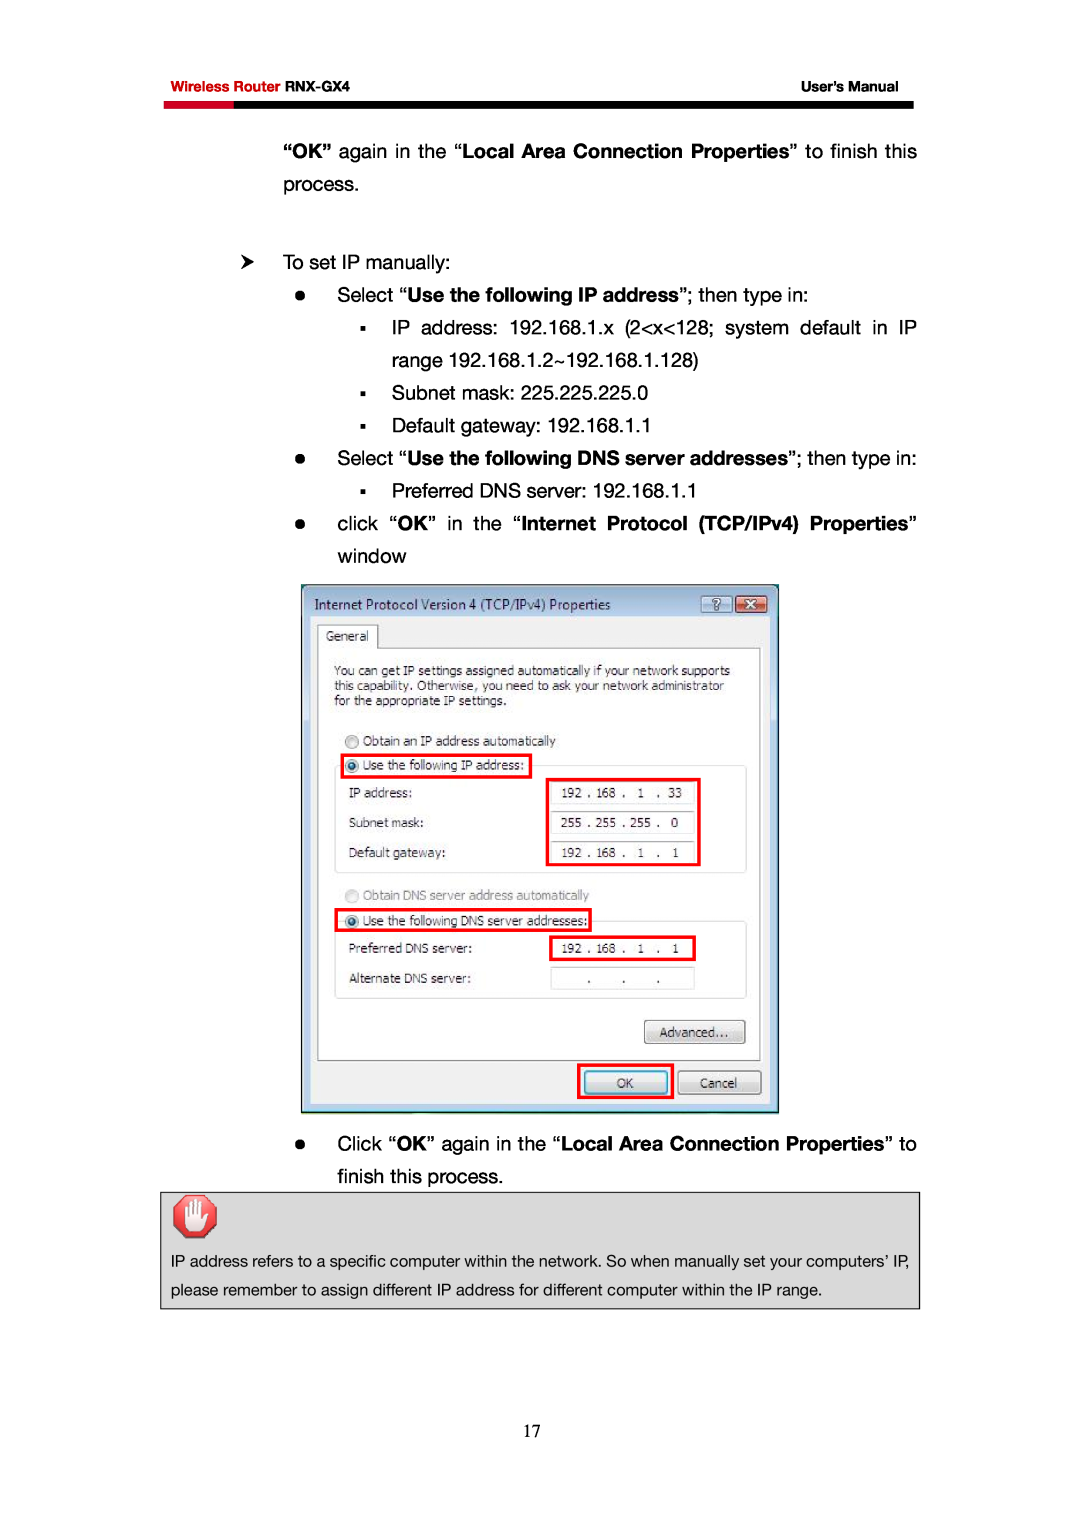 Rosewill RNX-GX4 user manual z Select “Use the following IP address” then type in 